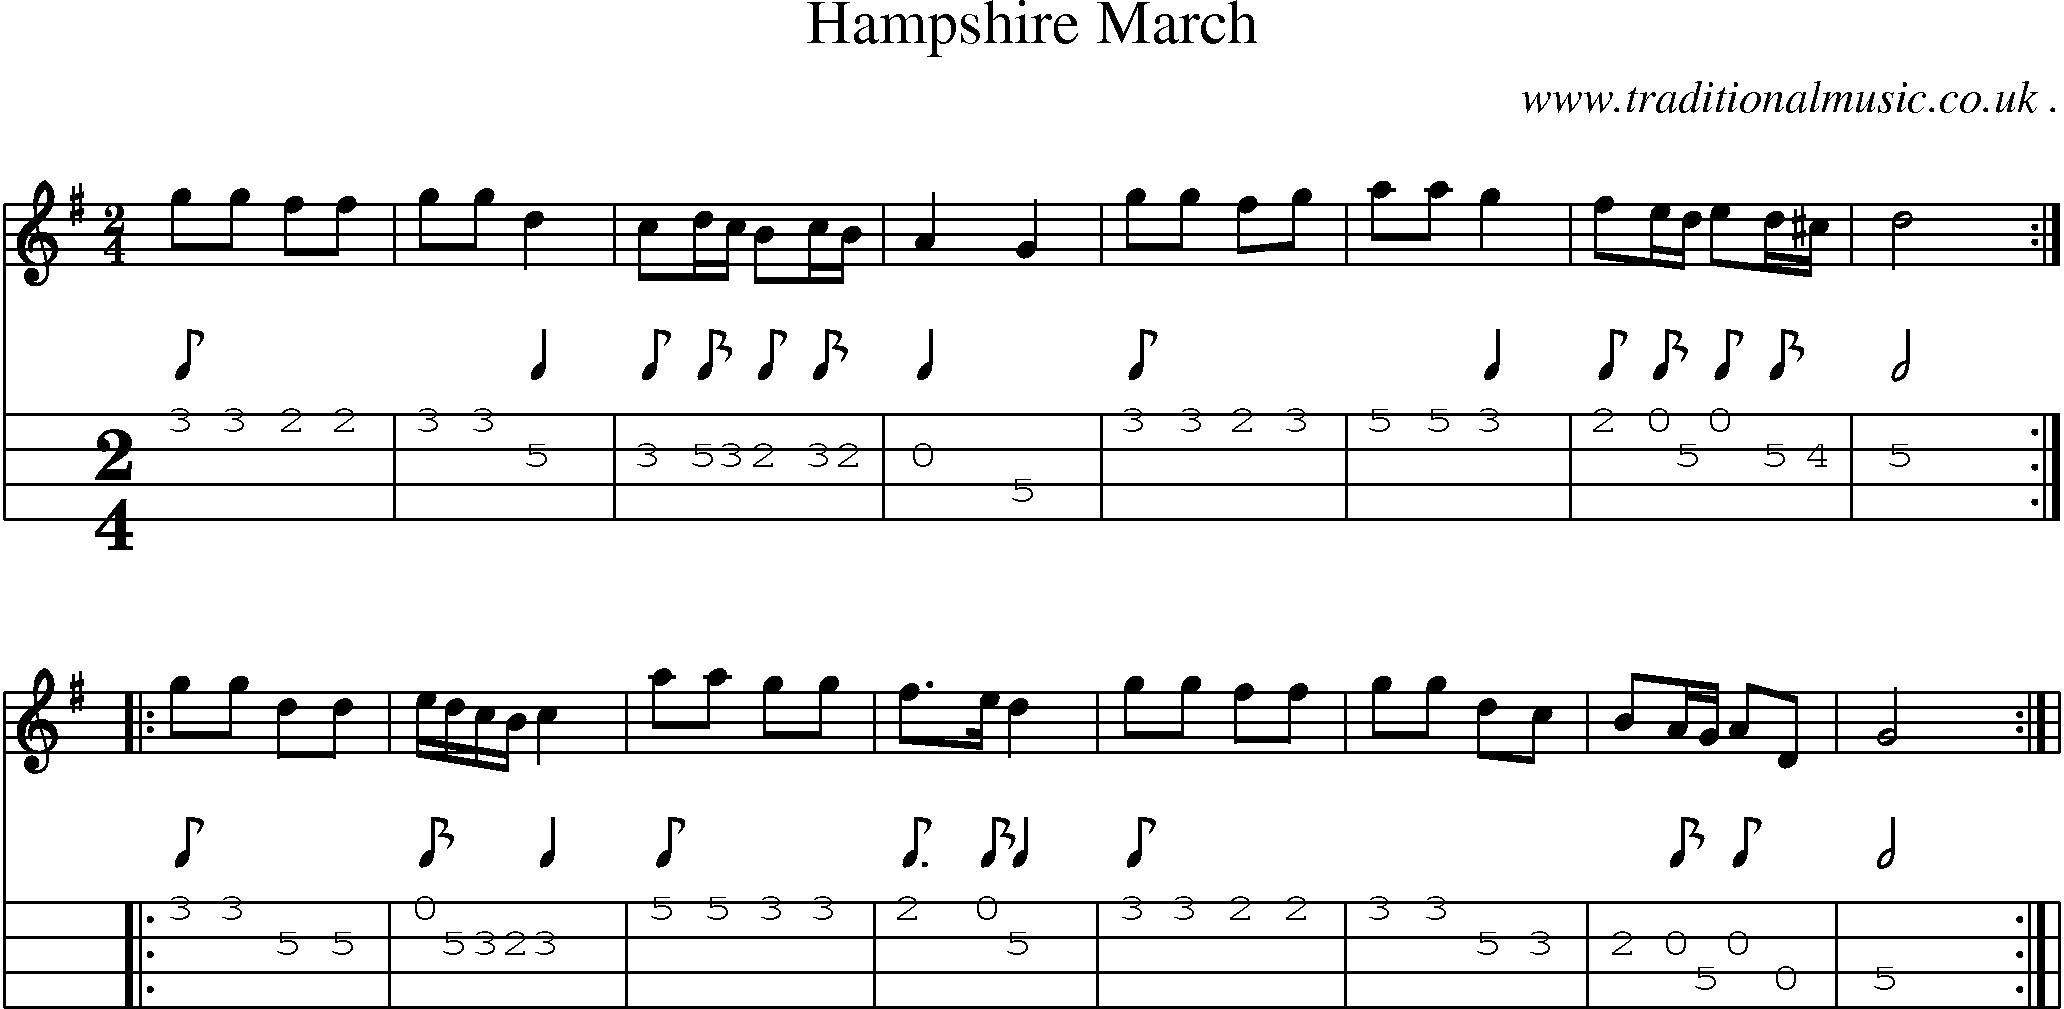 Sheet-Music and Mandolin Tabs for Hampshire March